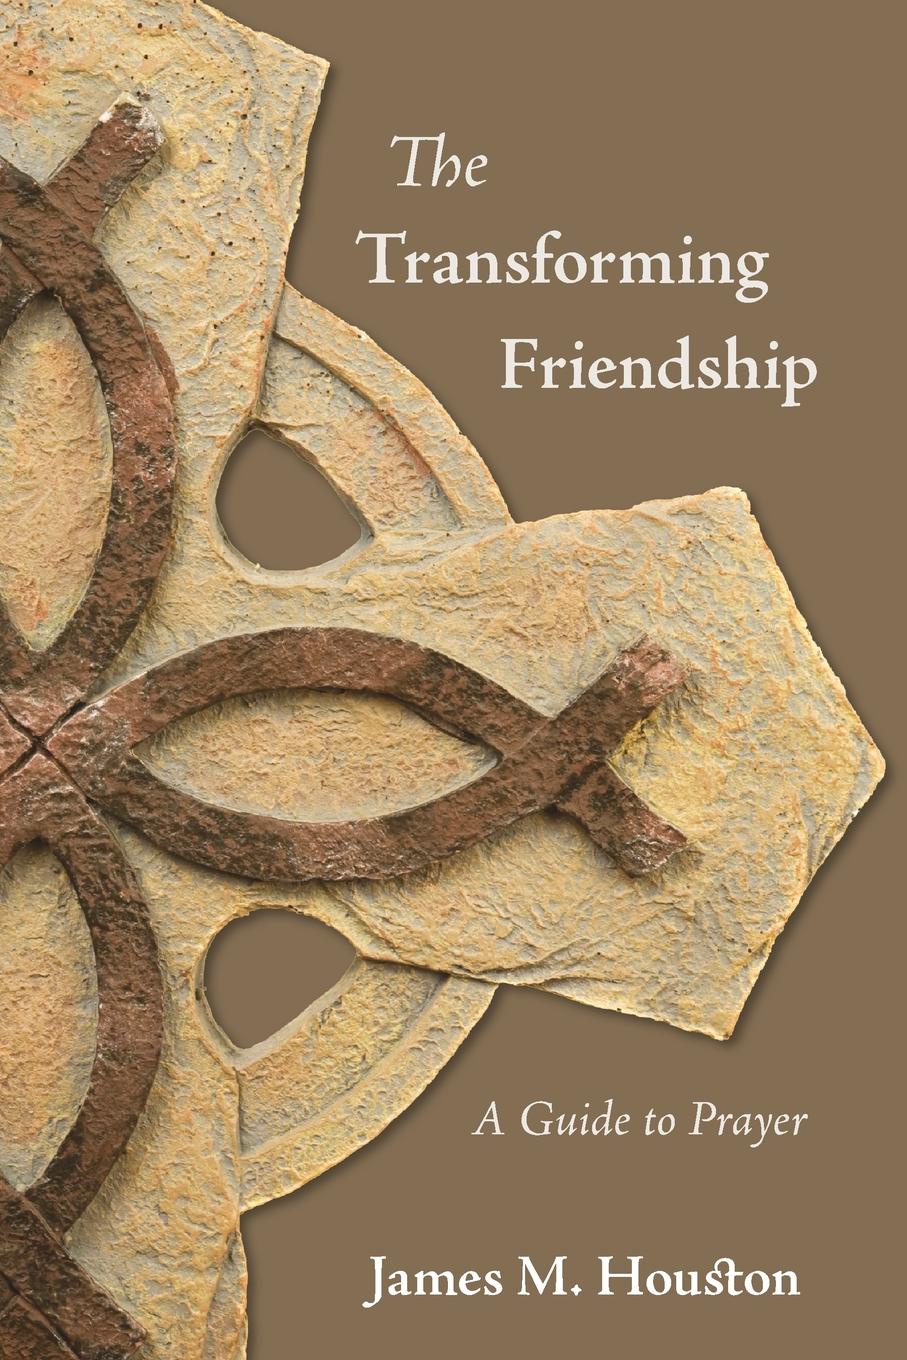 The Transforming Friendship. A Guide to Prayer